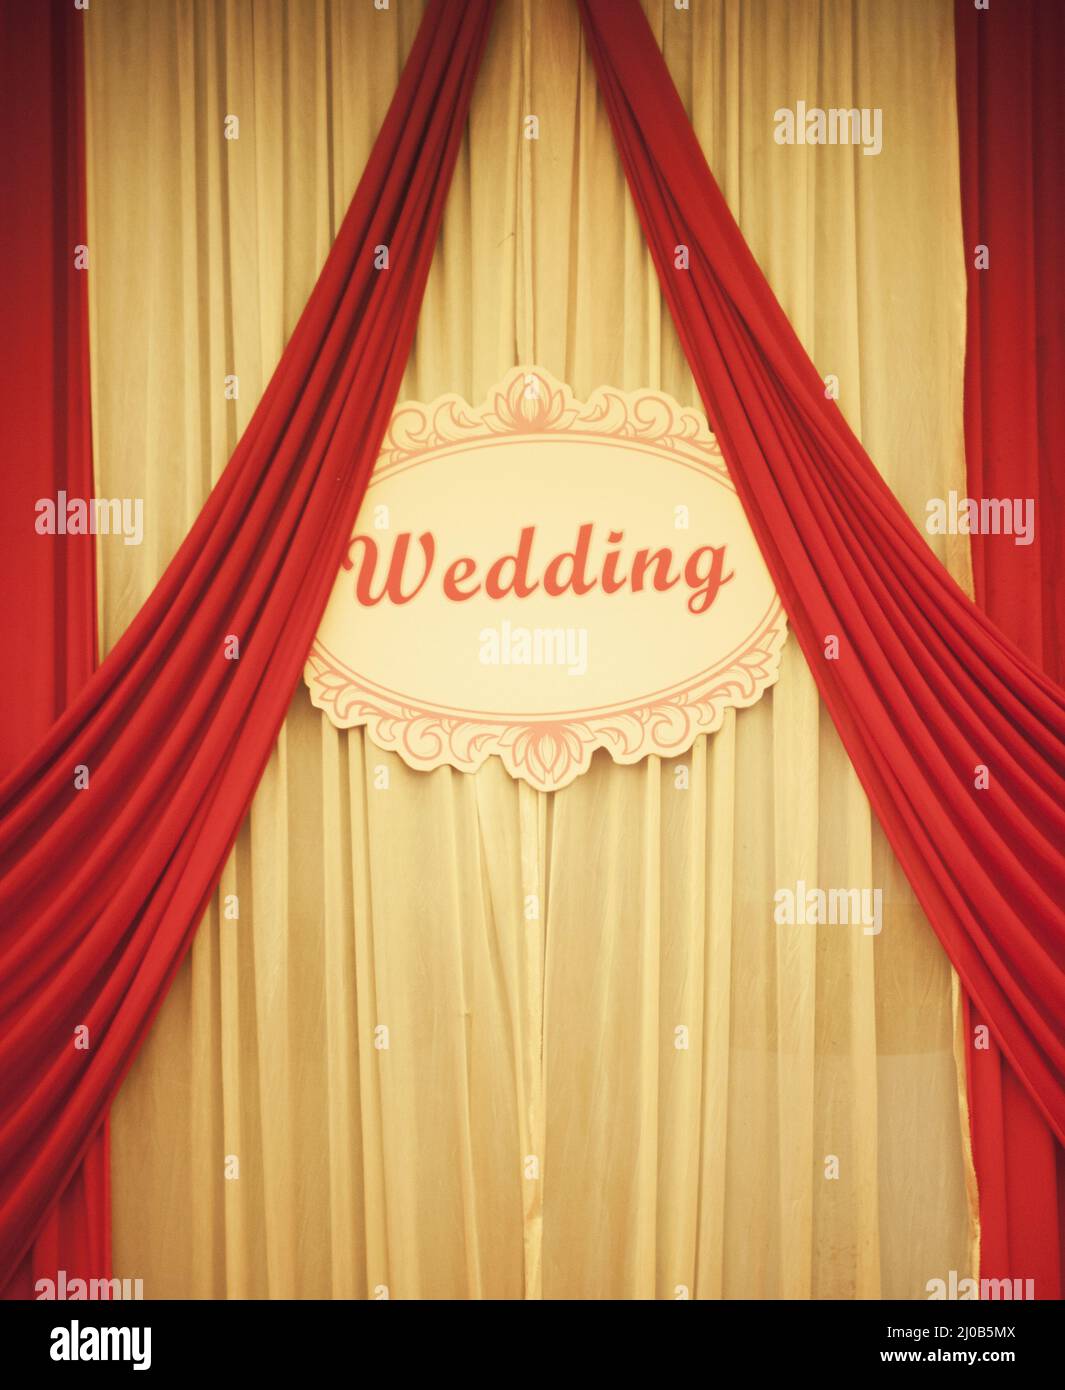 Chinese traditional red marriage banquet curtains with wedding sign Stock Photo